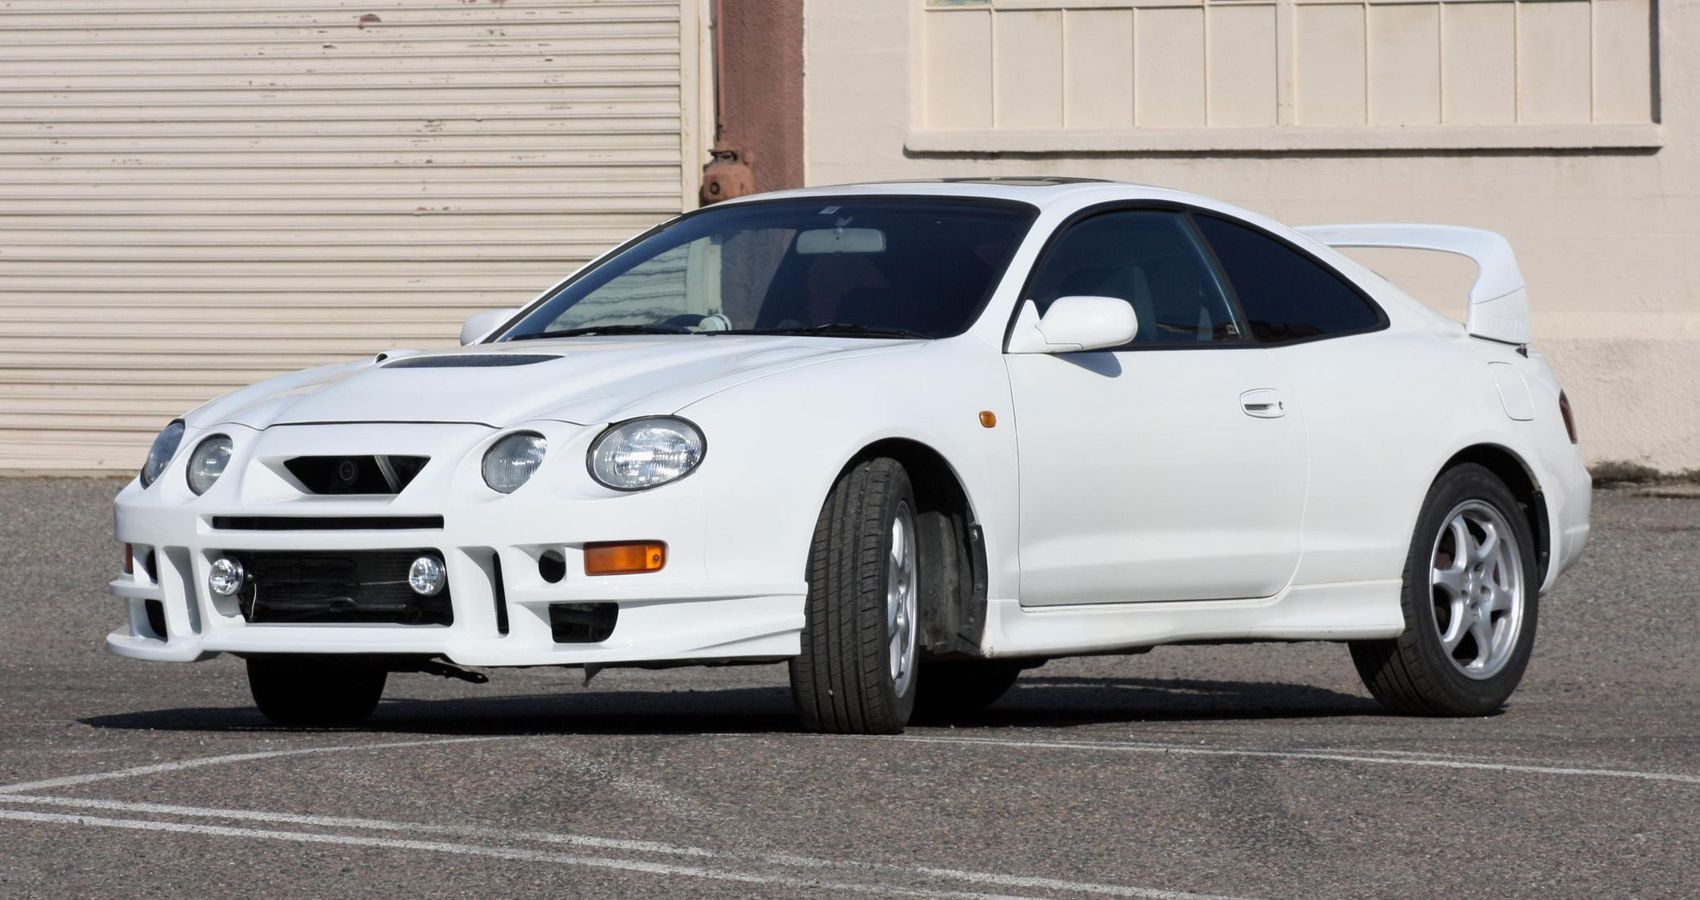 1996 Toyota Celica GT Four, white, front view